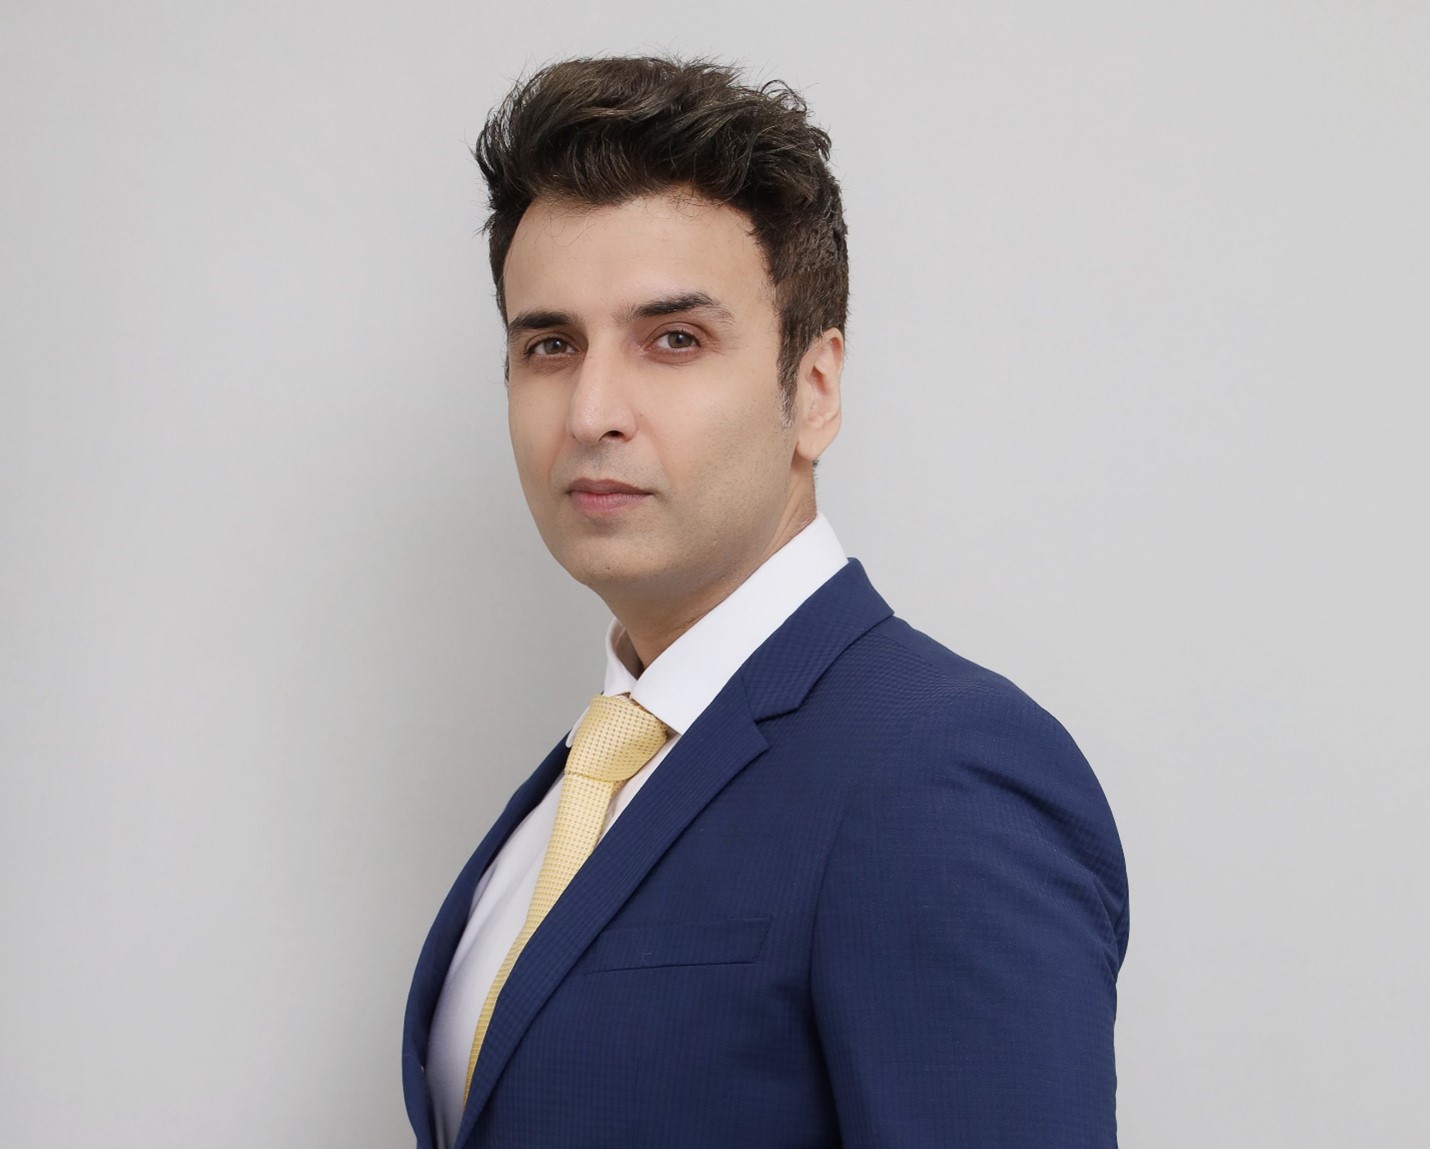 BMM Testlabs Singapore Announces Promotion of Vineet Malhotra to Vice President of Technical Services and Compliance, Asia